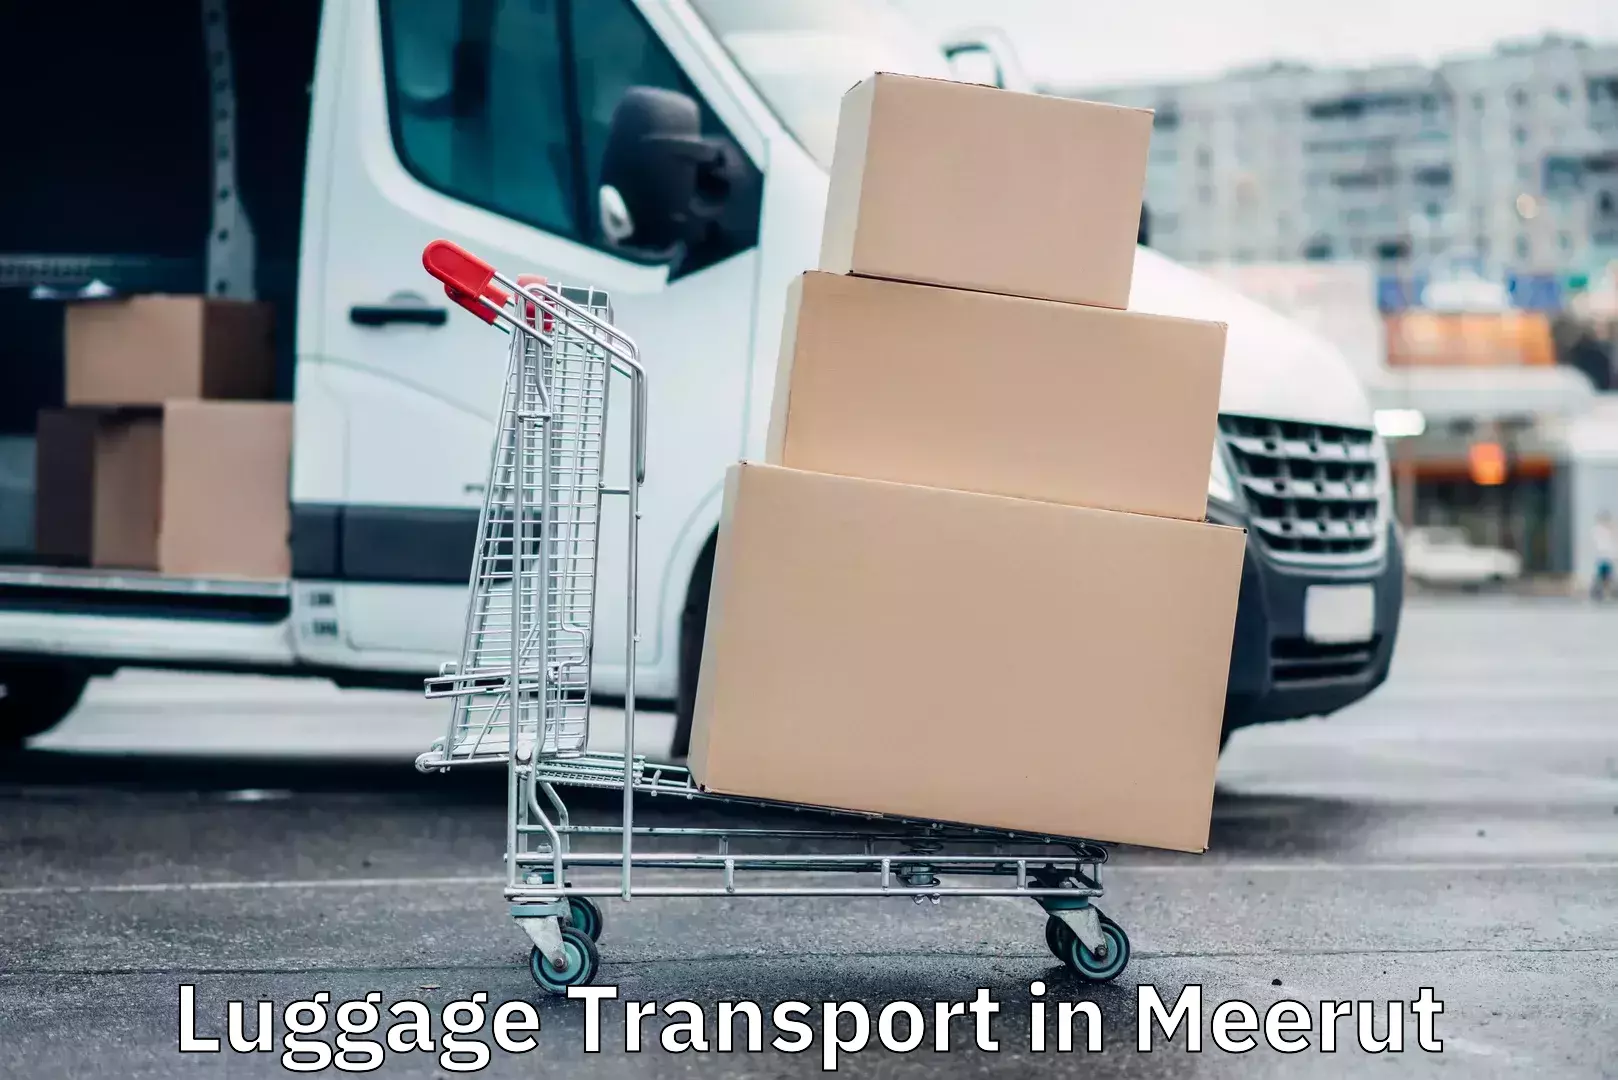 High-quality baggage shipment in Meerut